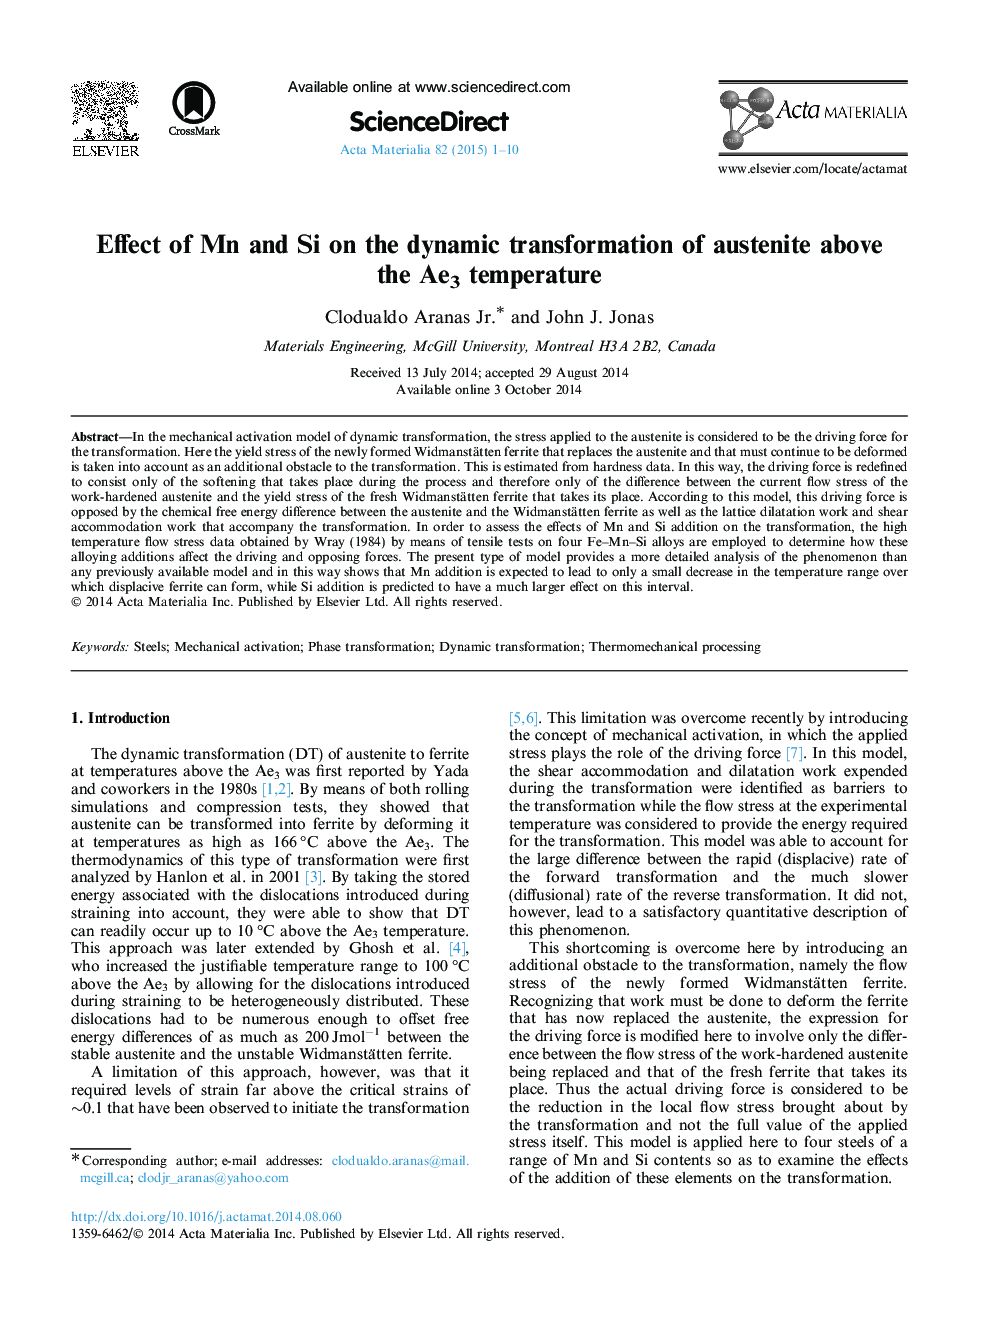 Effect of Mn and Si on the dynamic transformation of austenite above the Ae3 temperature